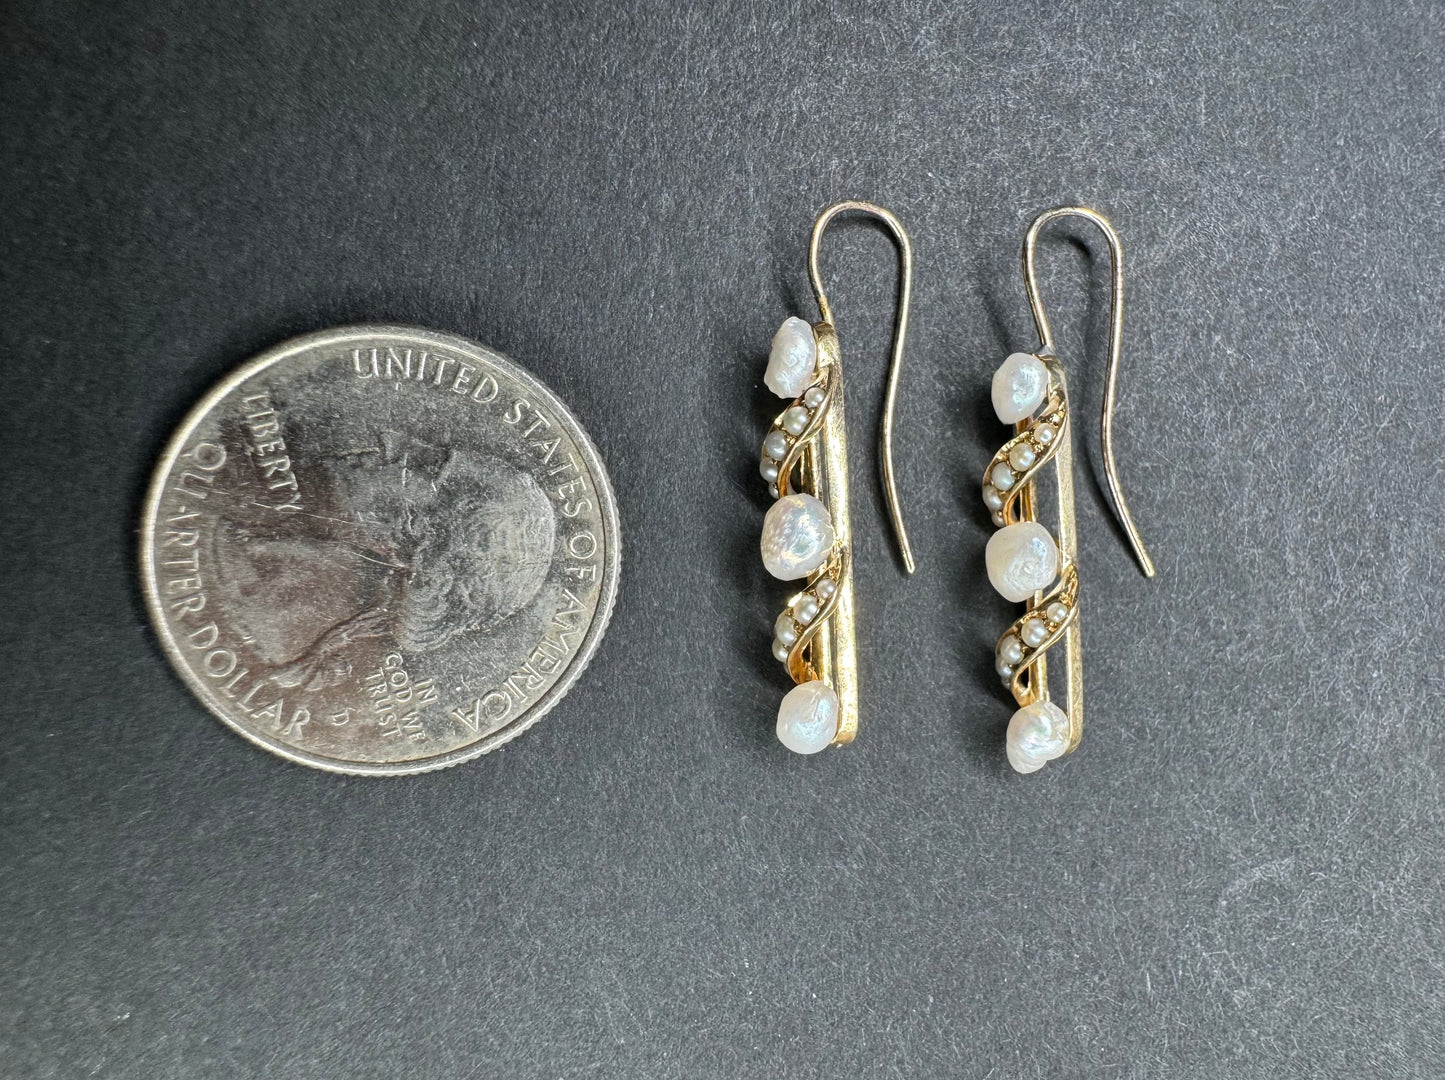 14kt Natural Pearl Earrings Converted From Brooch